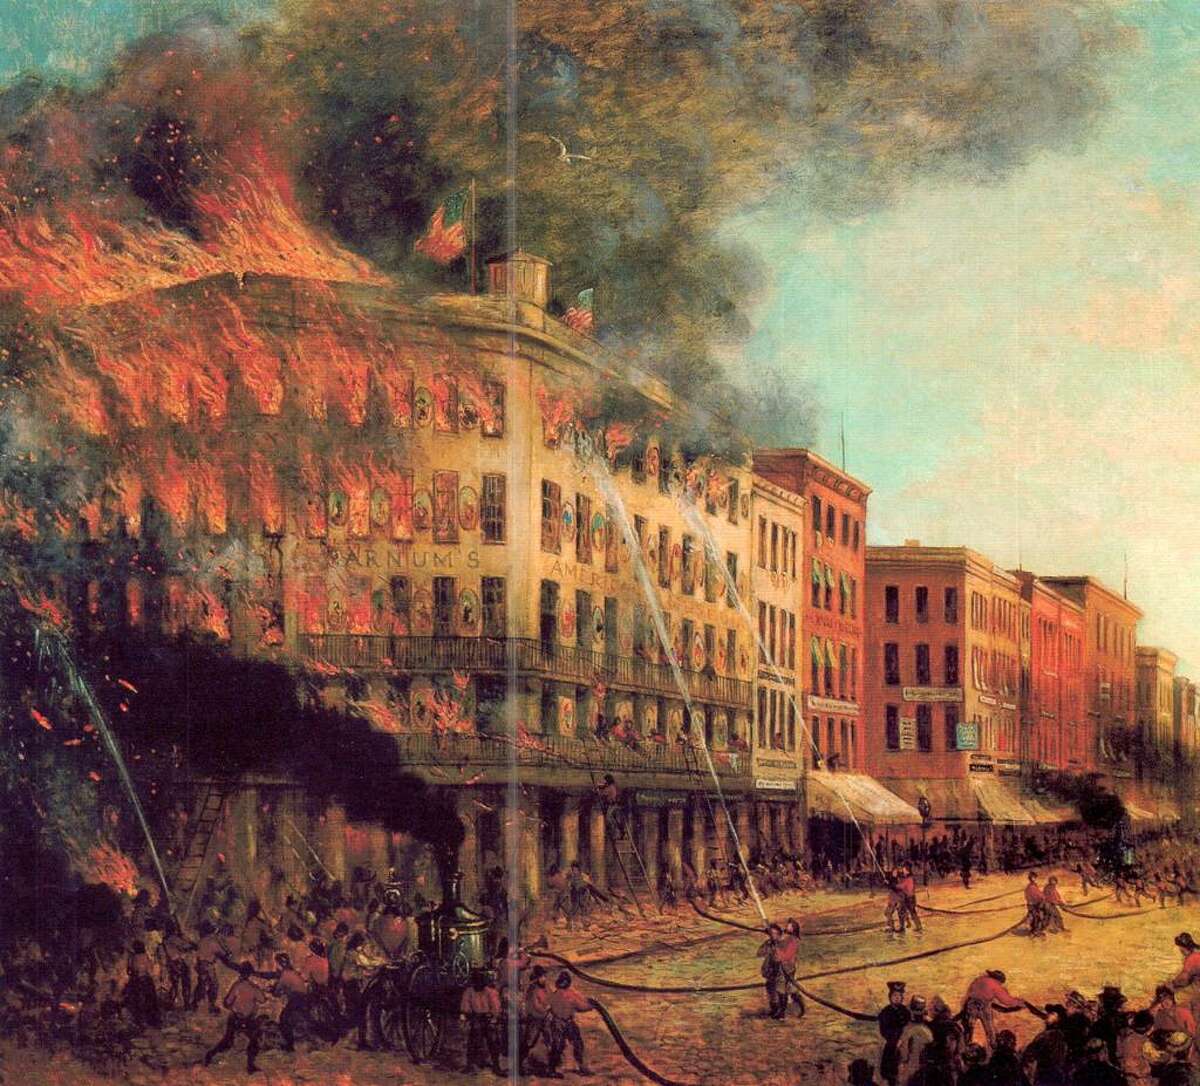 Fire at the Barnum American Museum in 1865, in New York, courtesy of the Barnum Museum.